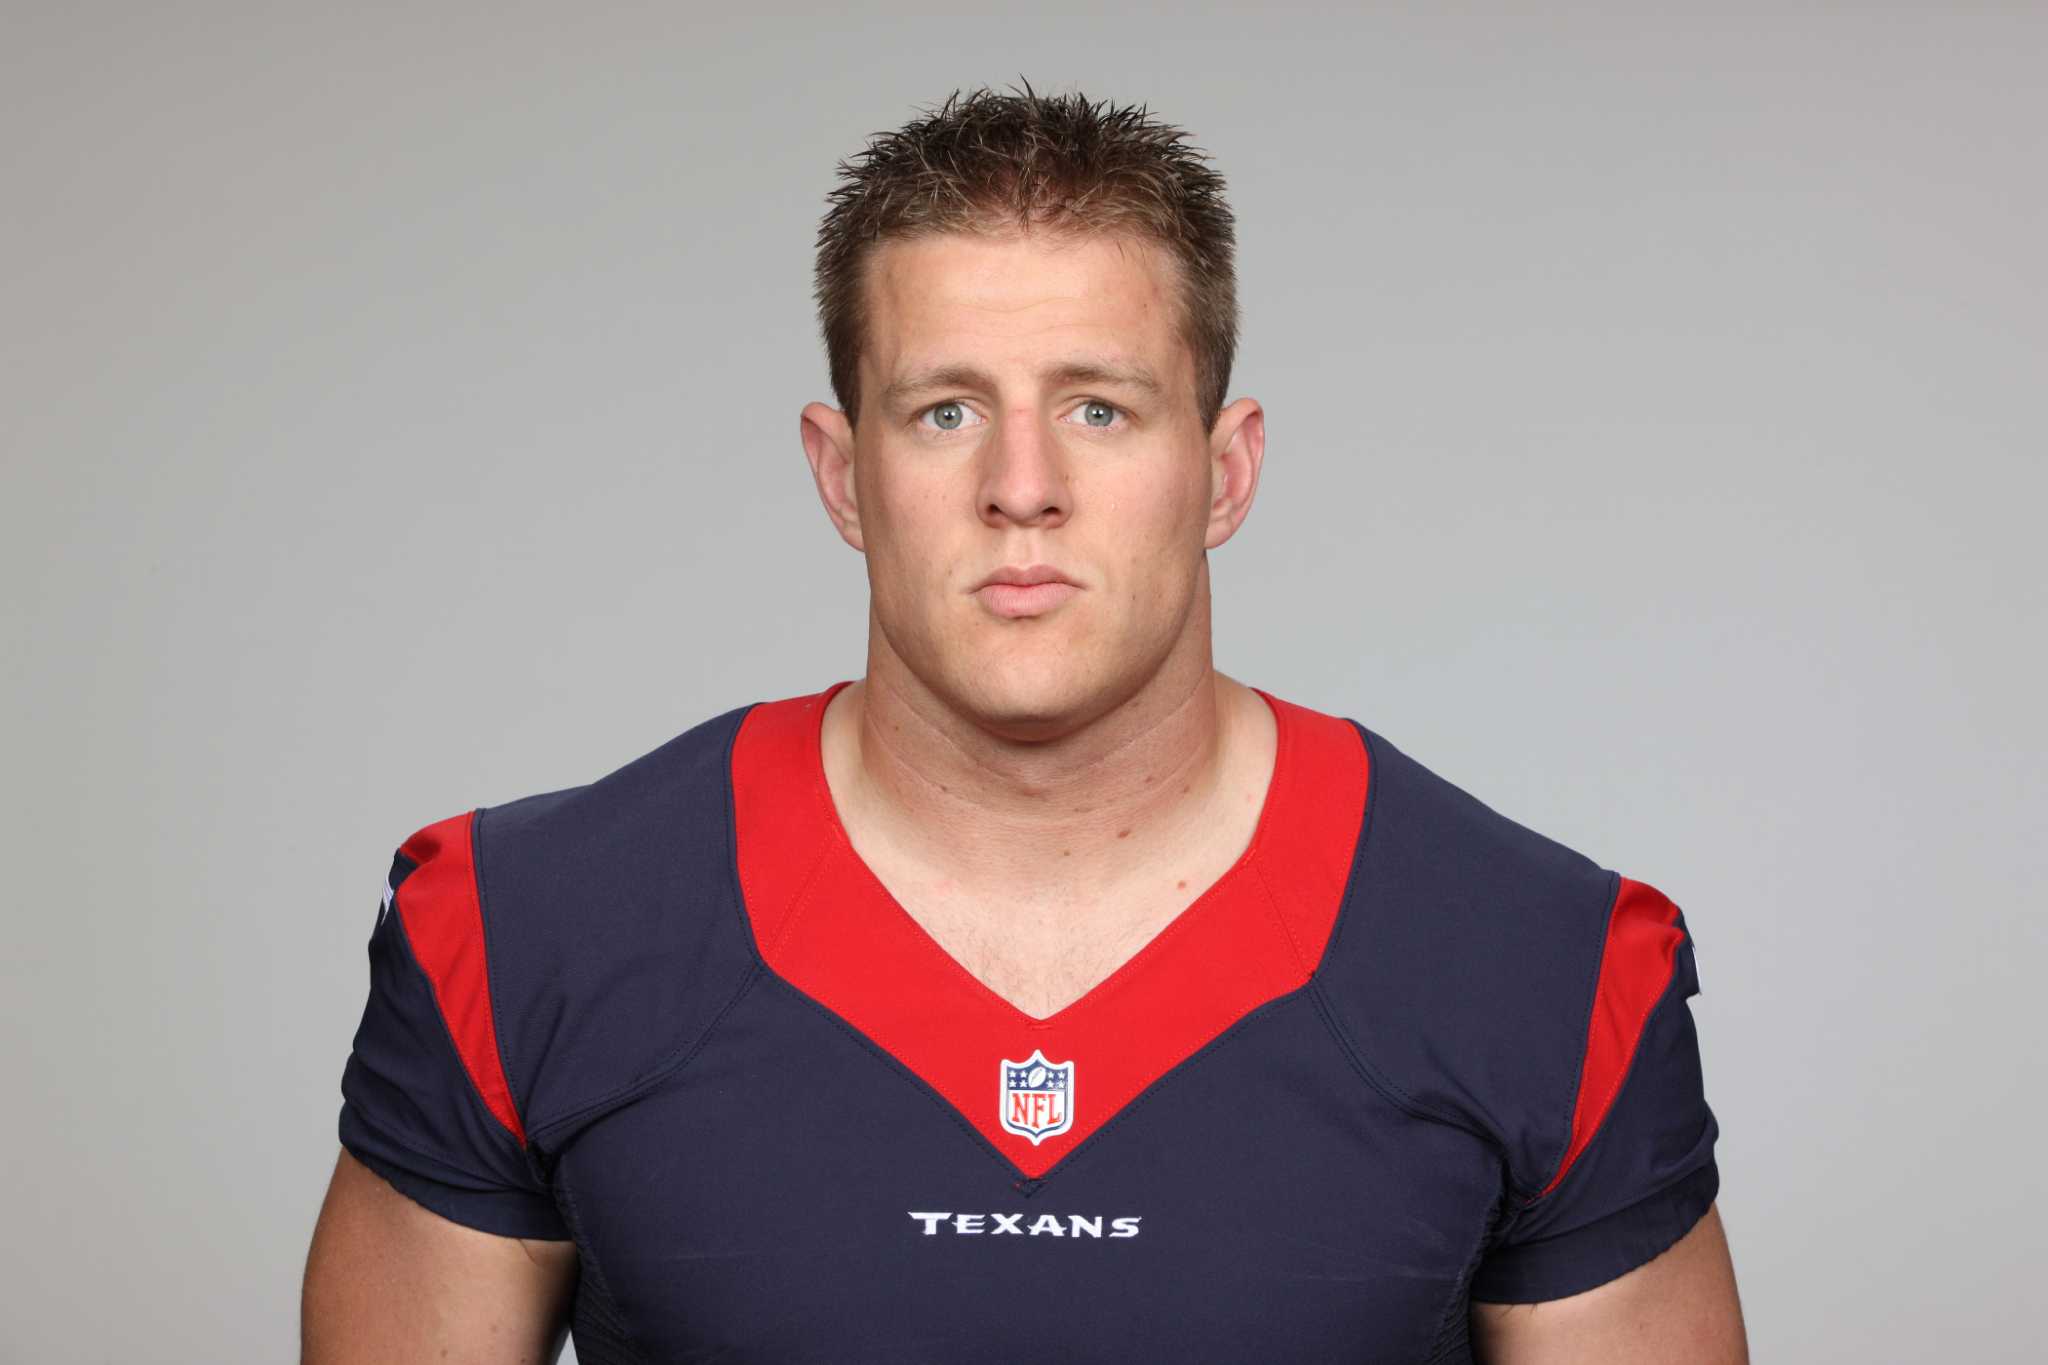 After rugged 2013 season, Texans' Watt finds solace in 'Rocky.